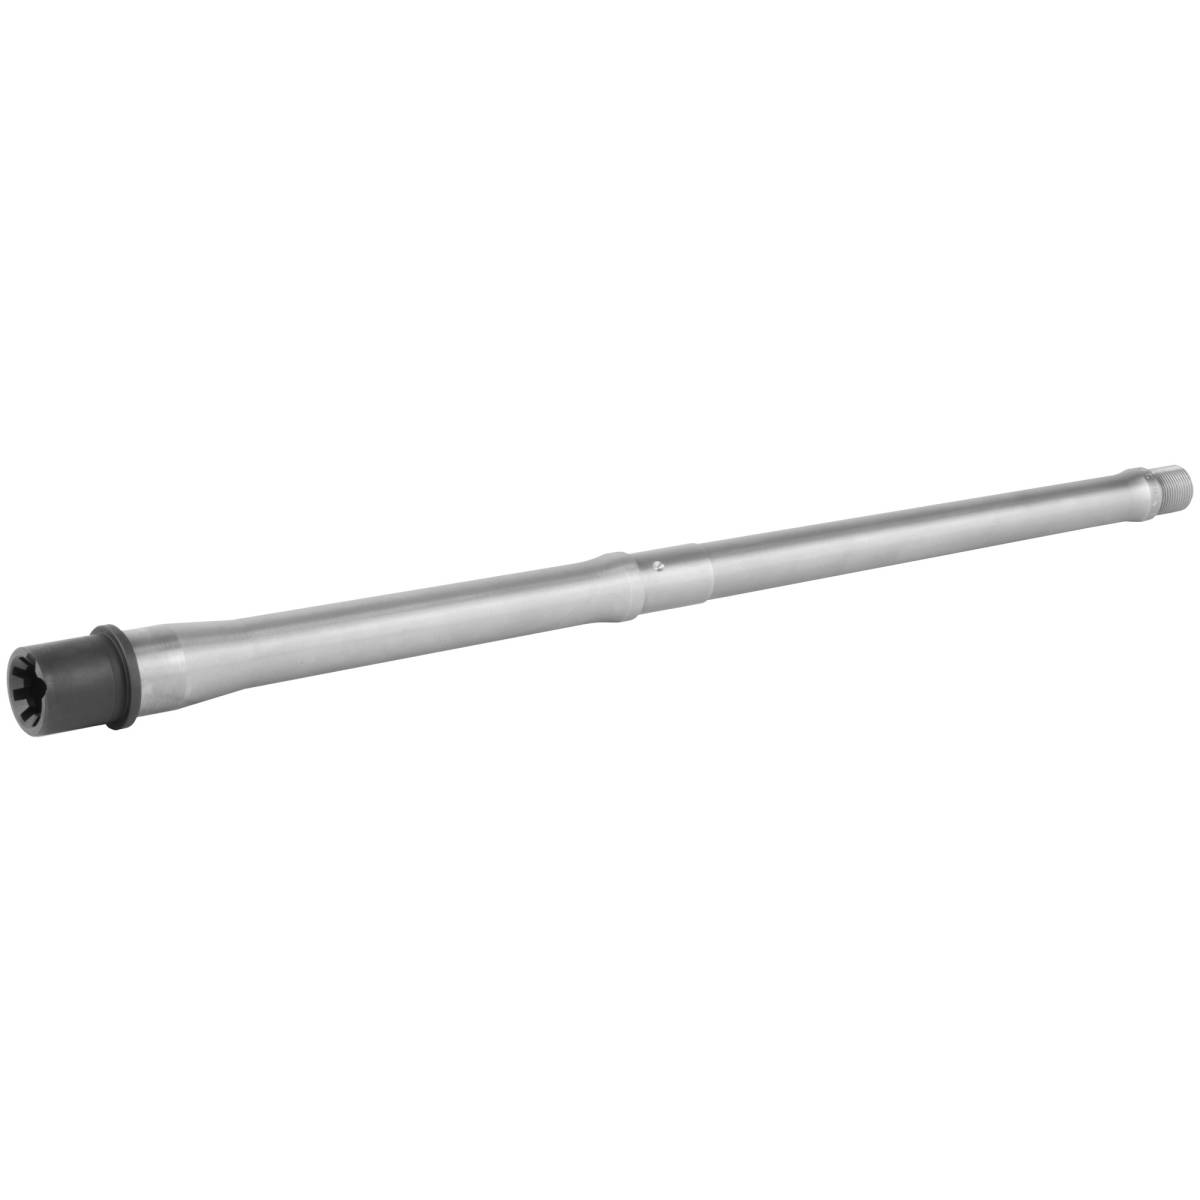 CMMG 30DC30A Barrel Sub-Assembly 300 Blackout 16.10” Stainless Bead...